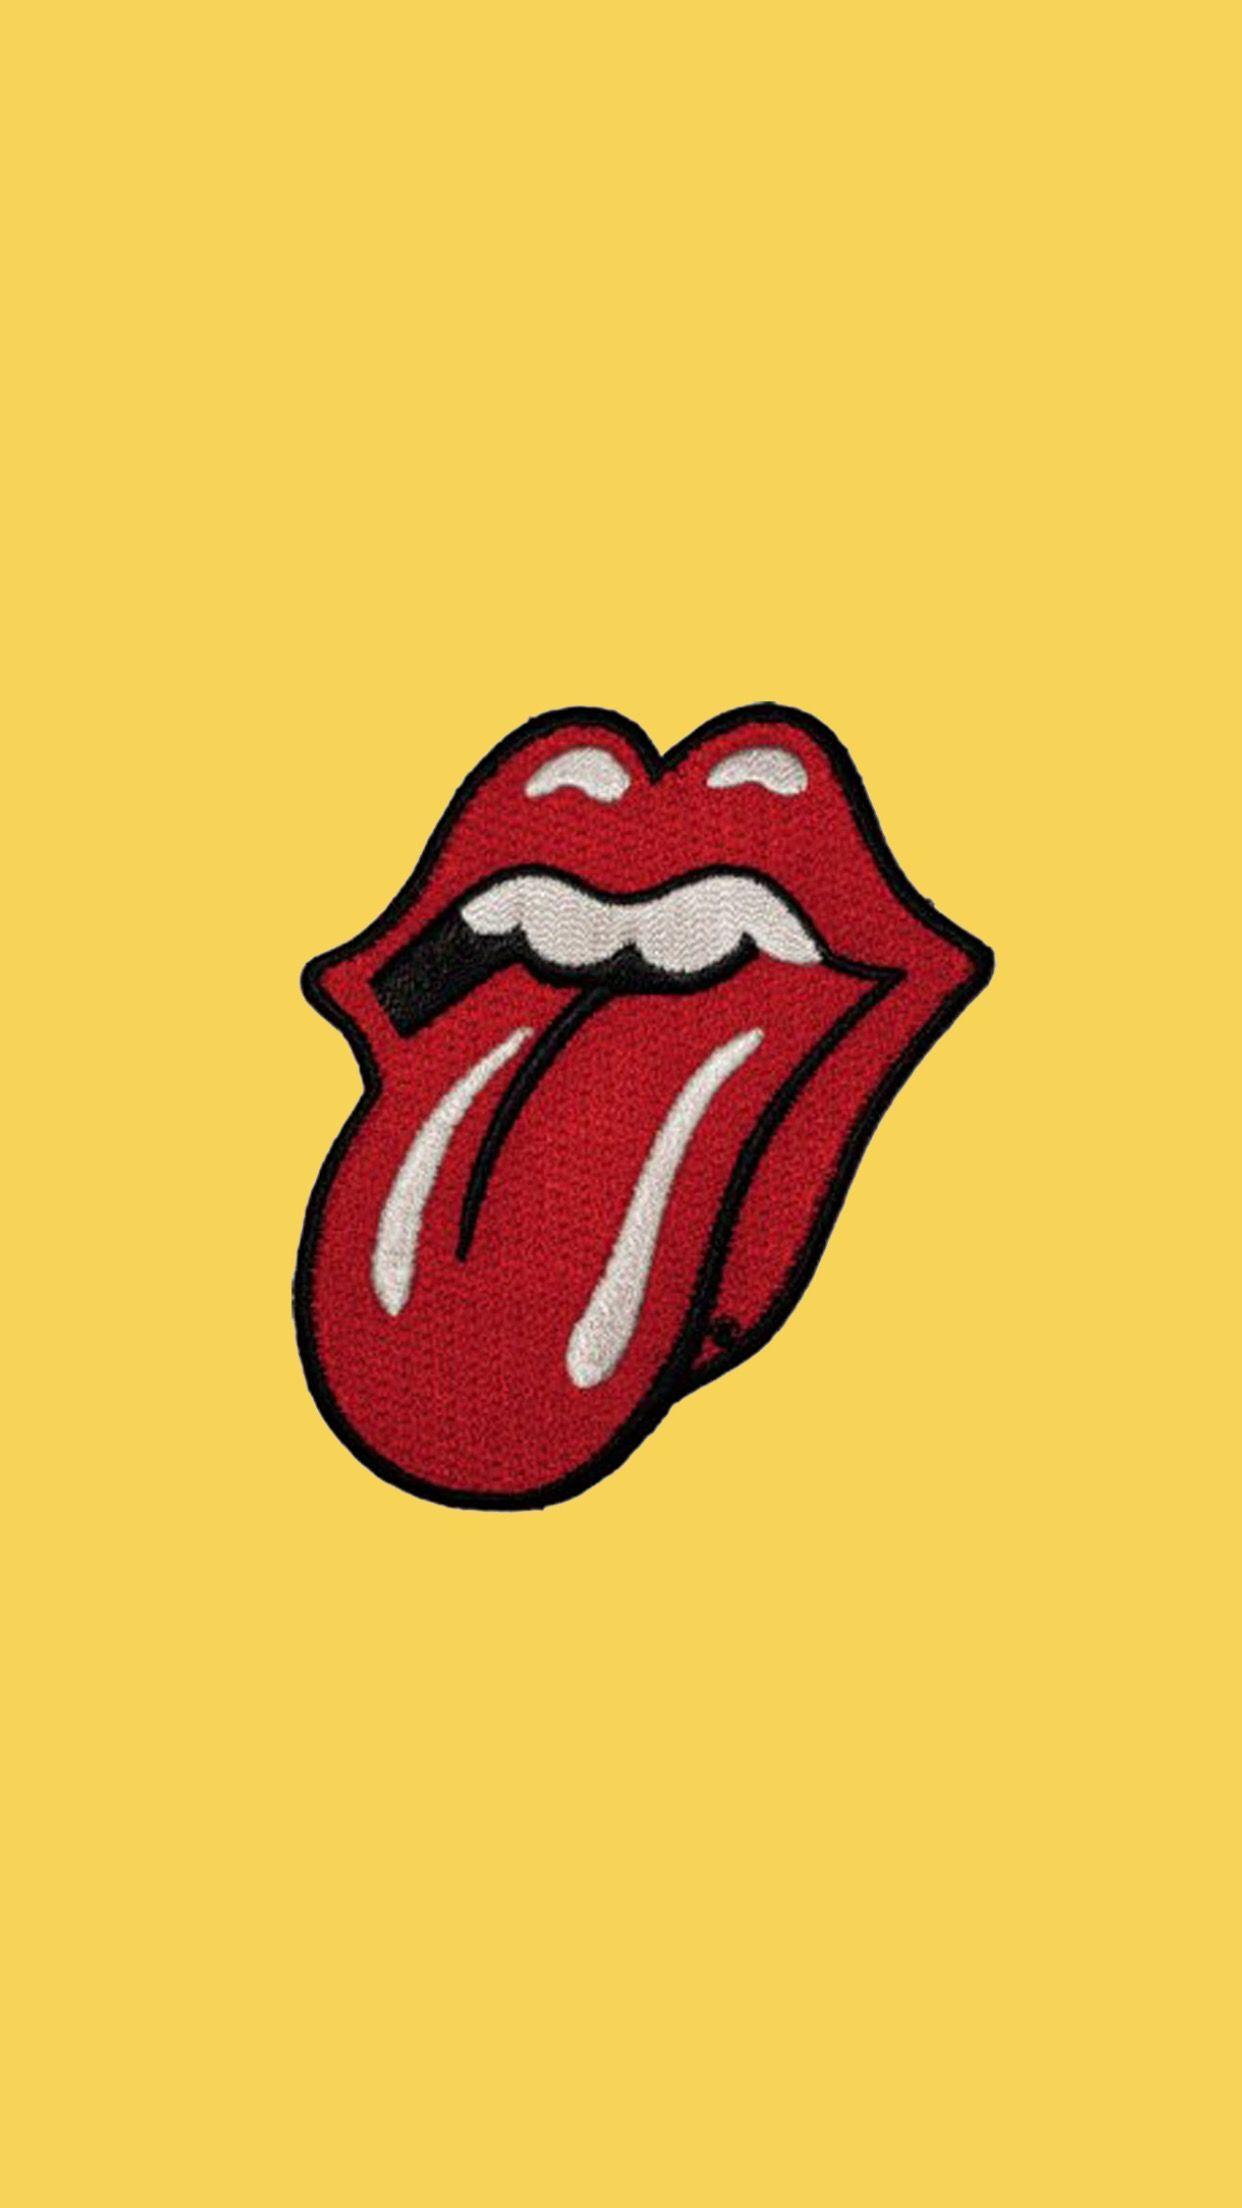 Red Lips and Tongue Logo - Yellow Lockscreen / Wallpaper / Background Lips Aesthetic Red Lips